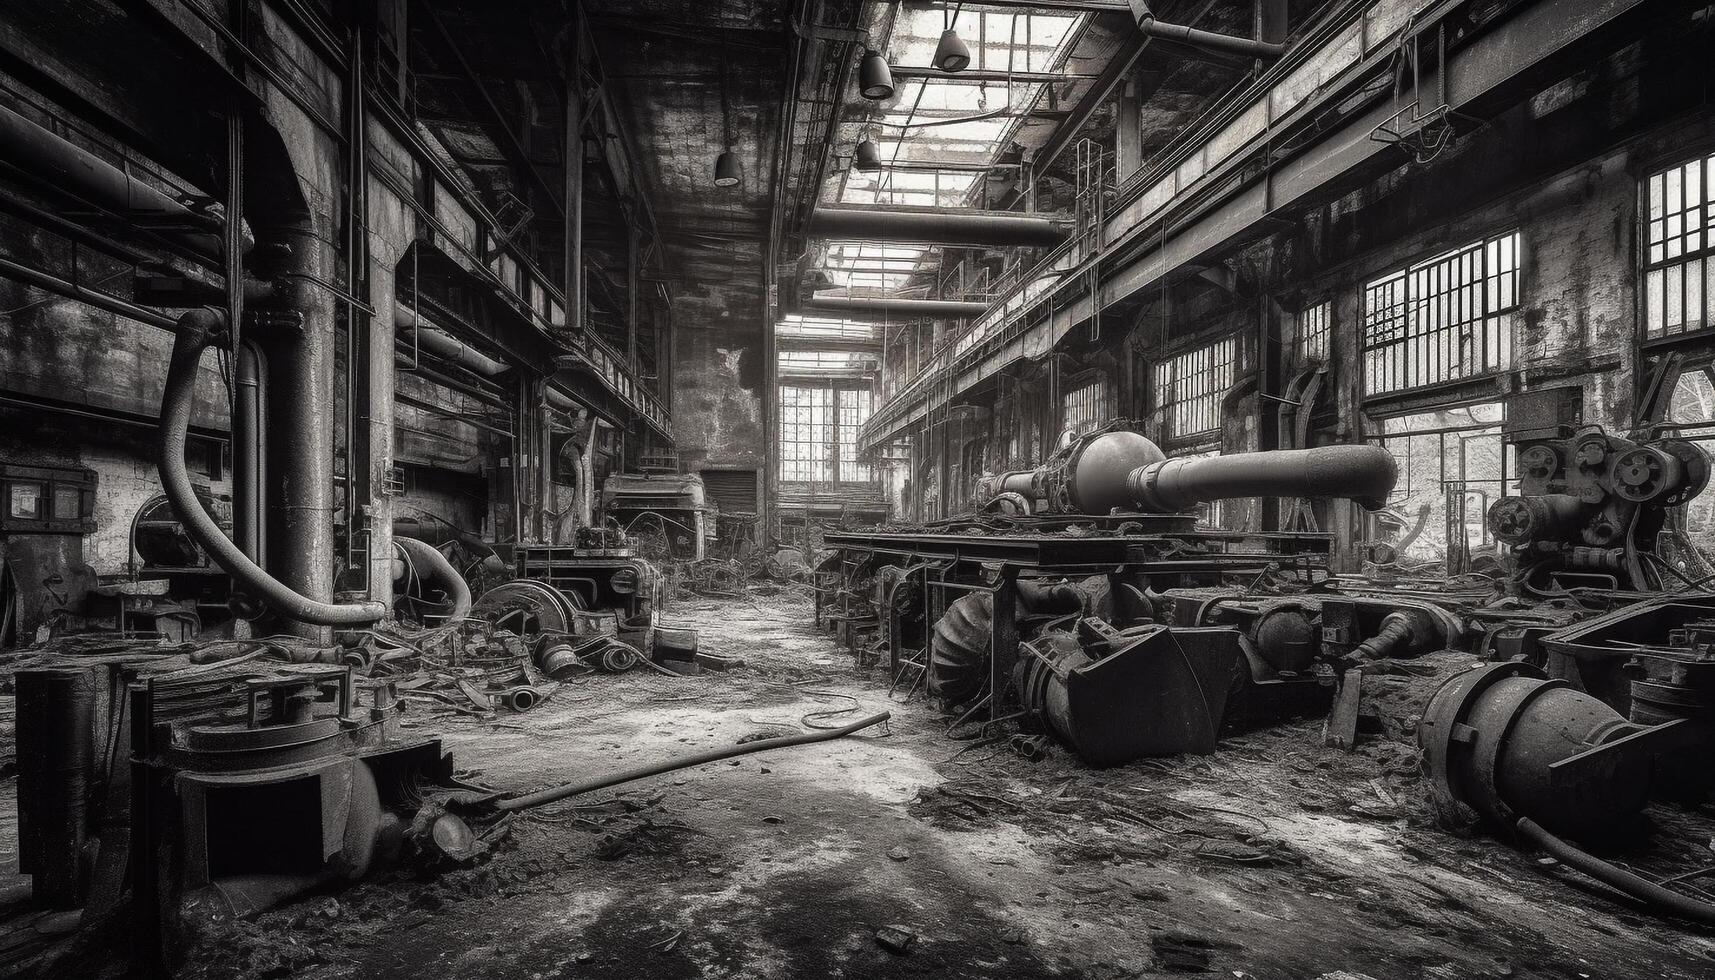 Abandoned factory rusty machinery, broken equipment, spooky built structure generated by AI photo